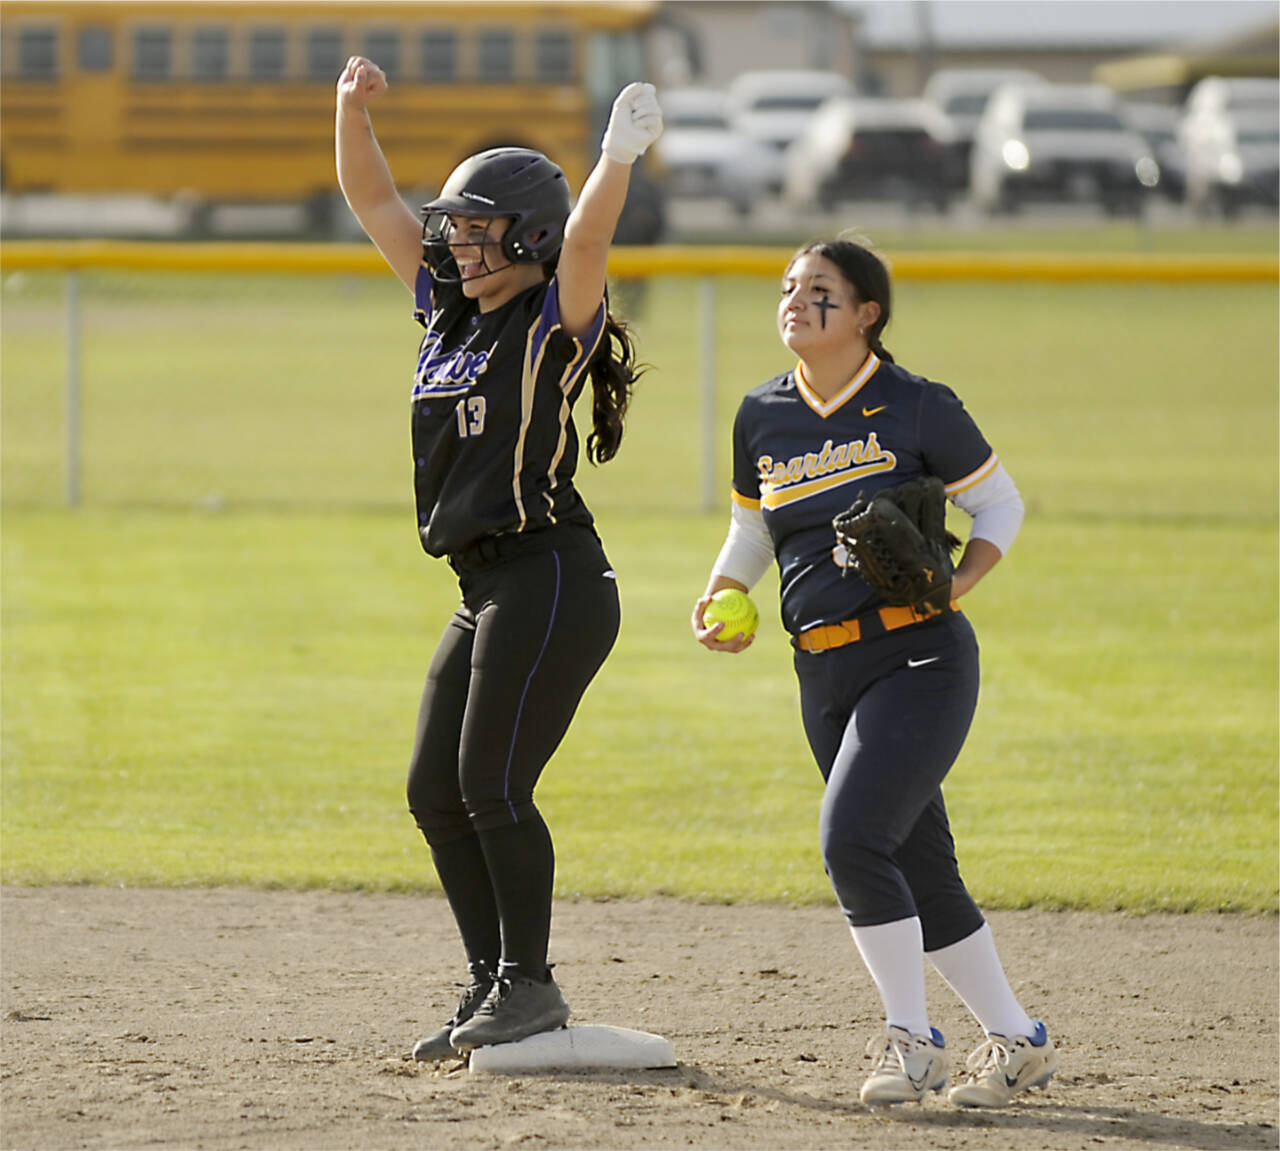 Sequim’s Taylee Rome (13) celebrates a double as Forks’ Lizzy Soto brings the ball into the infield Tuesday in Sequim. (Michael Dashiell/Olympic Peninsula Sports Group)